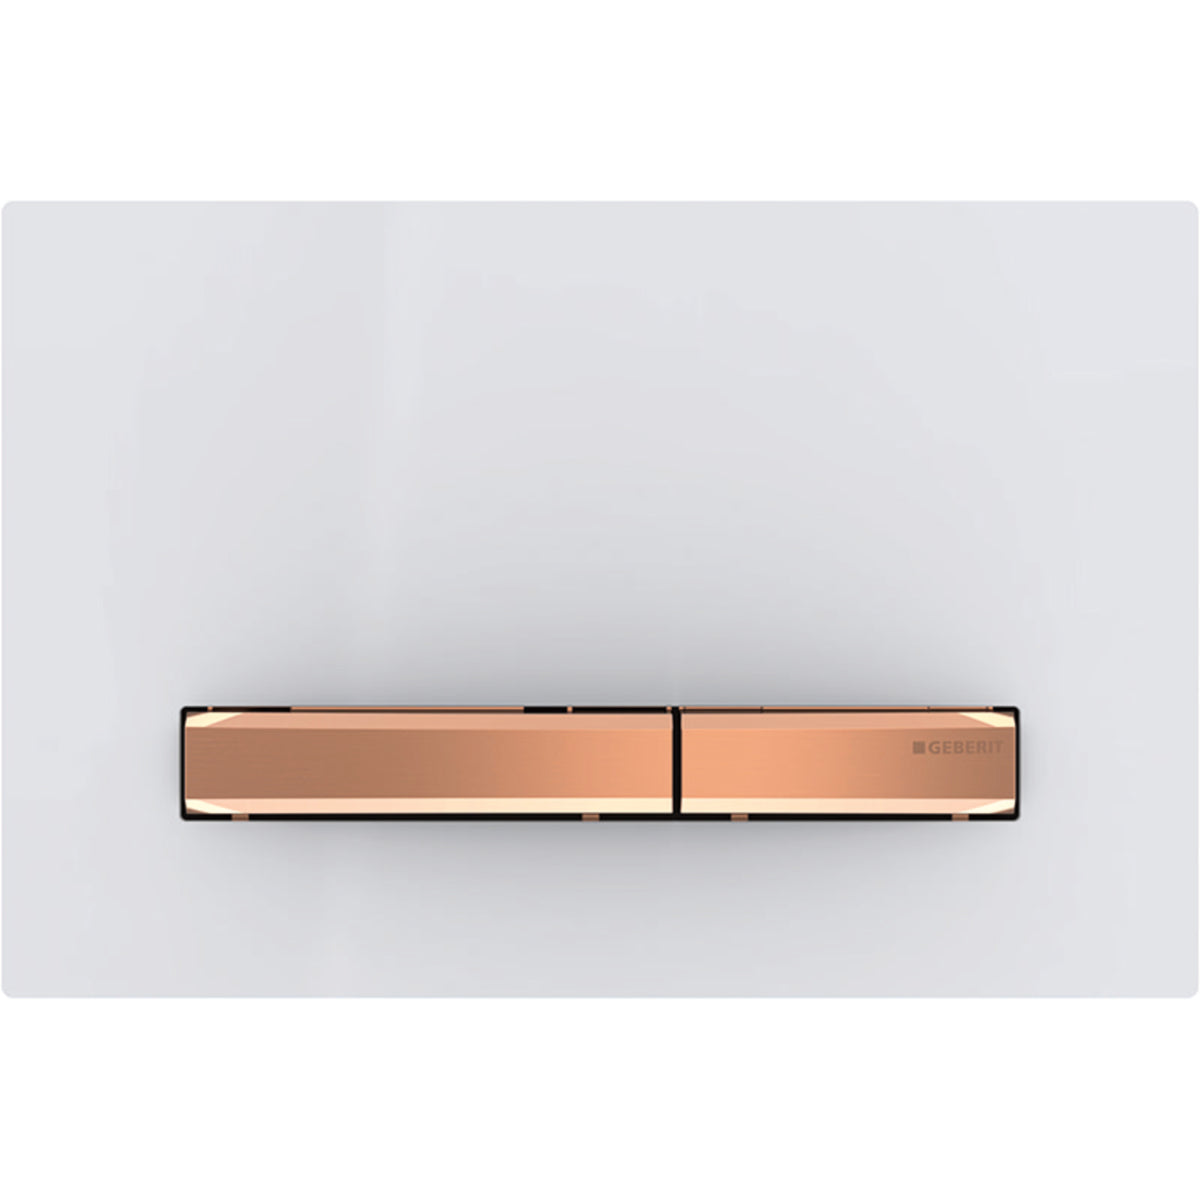 Geberit 115.670.11.2- Geberit actuator plate Sigma50 for dual flush, metal colour red gold: red gold, white - FaucetExpress.ca